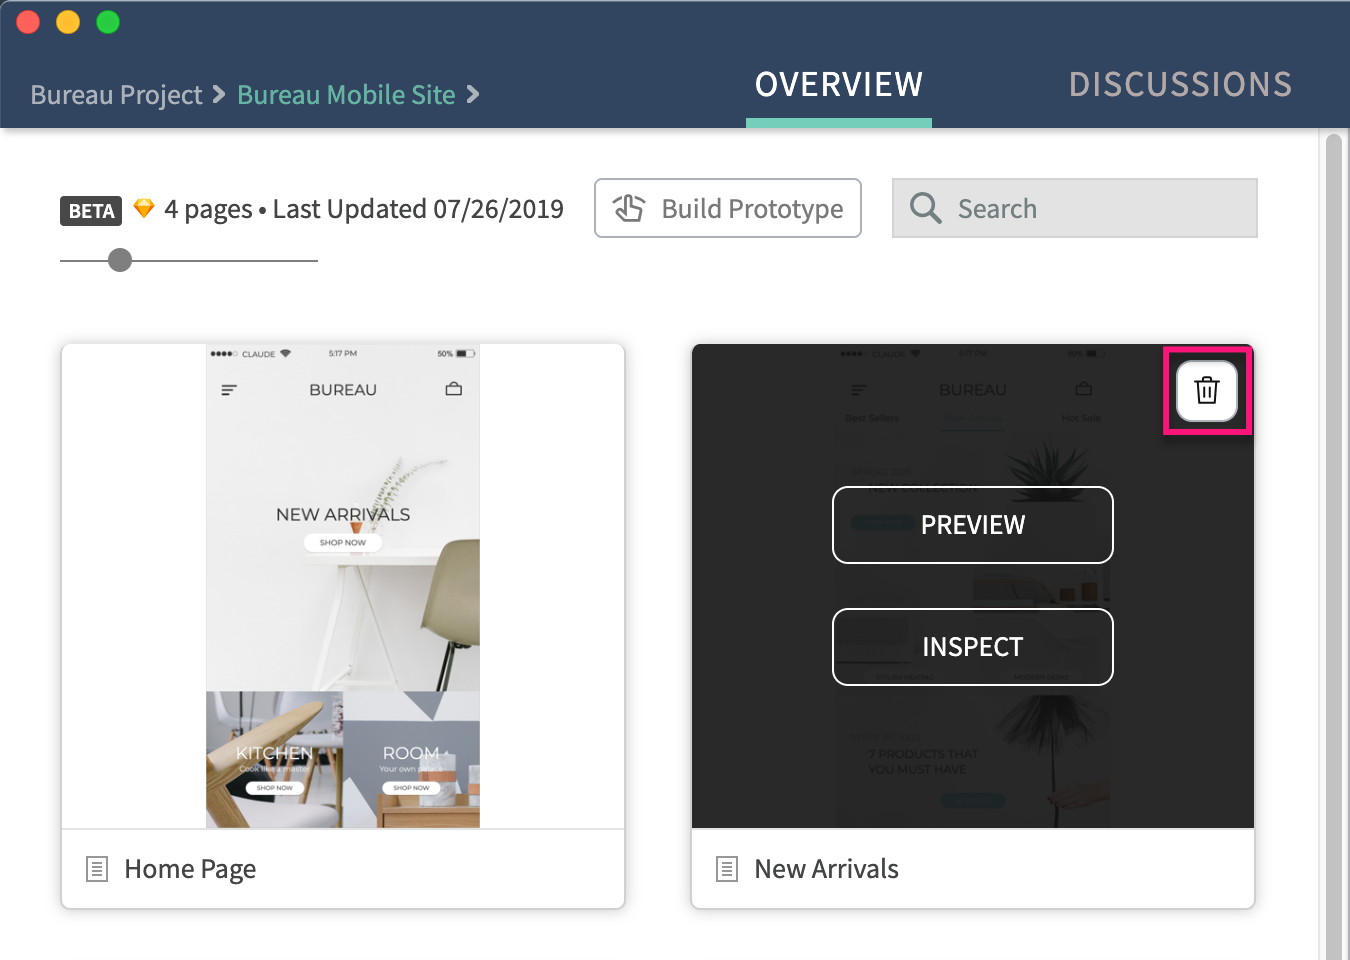 removing assets from artboard projects on the Overview screen